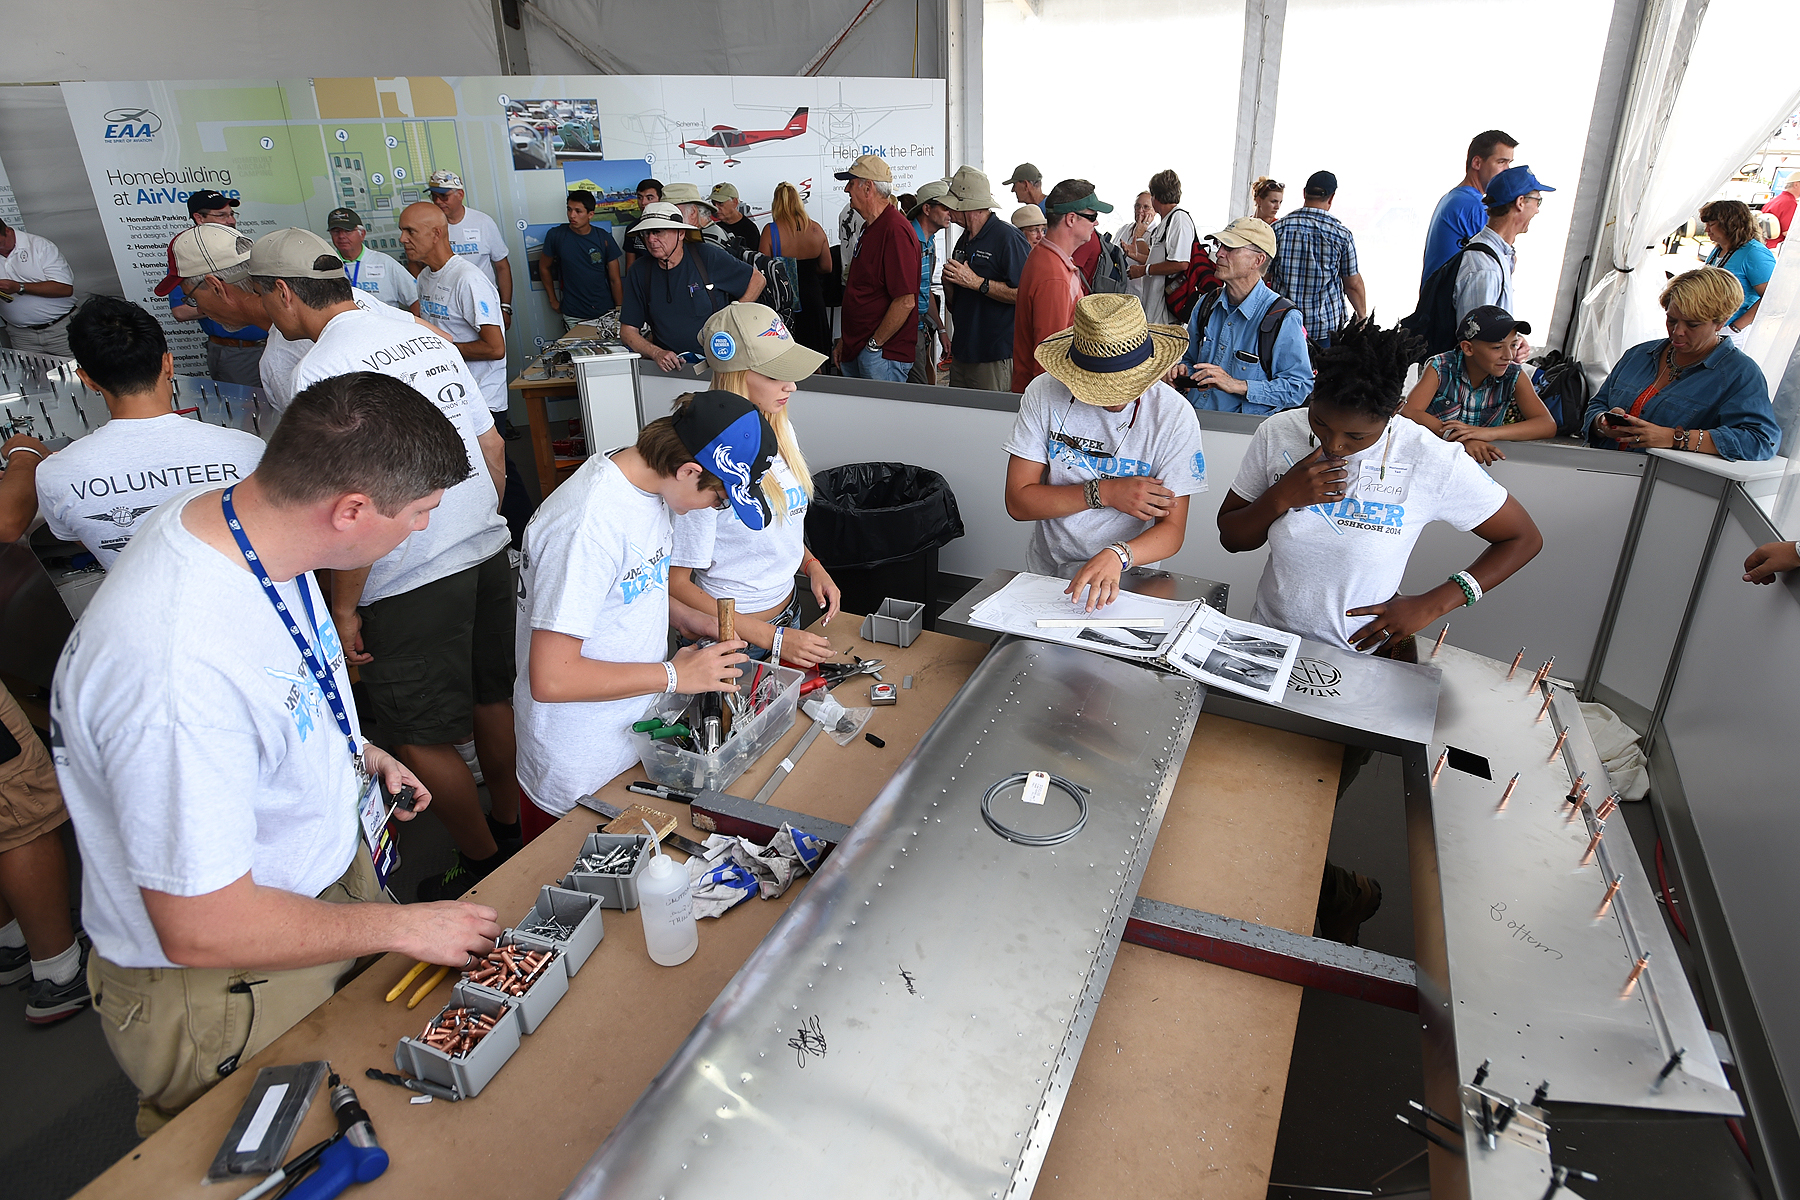 Volunteers and attendees joined forces to build an airplane in seven days in 2014. That project returns to EAA AirVenture Oshkosh in 2018.